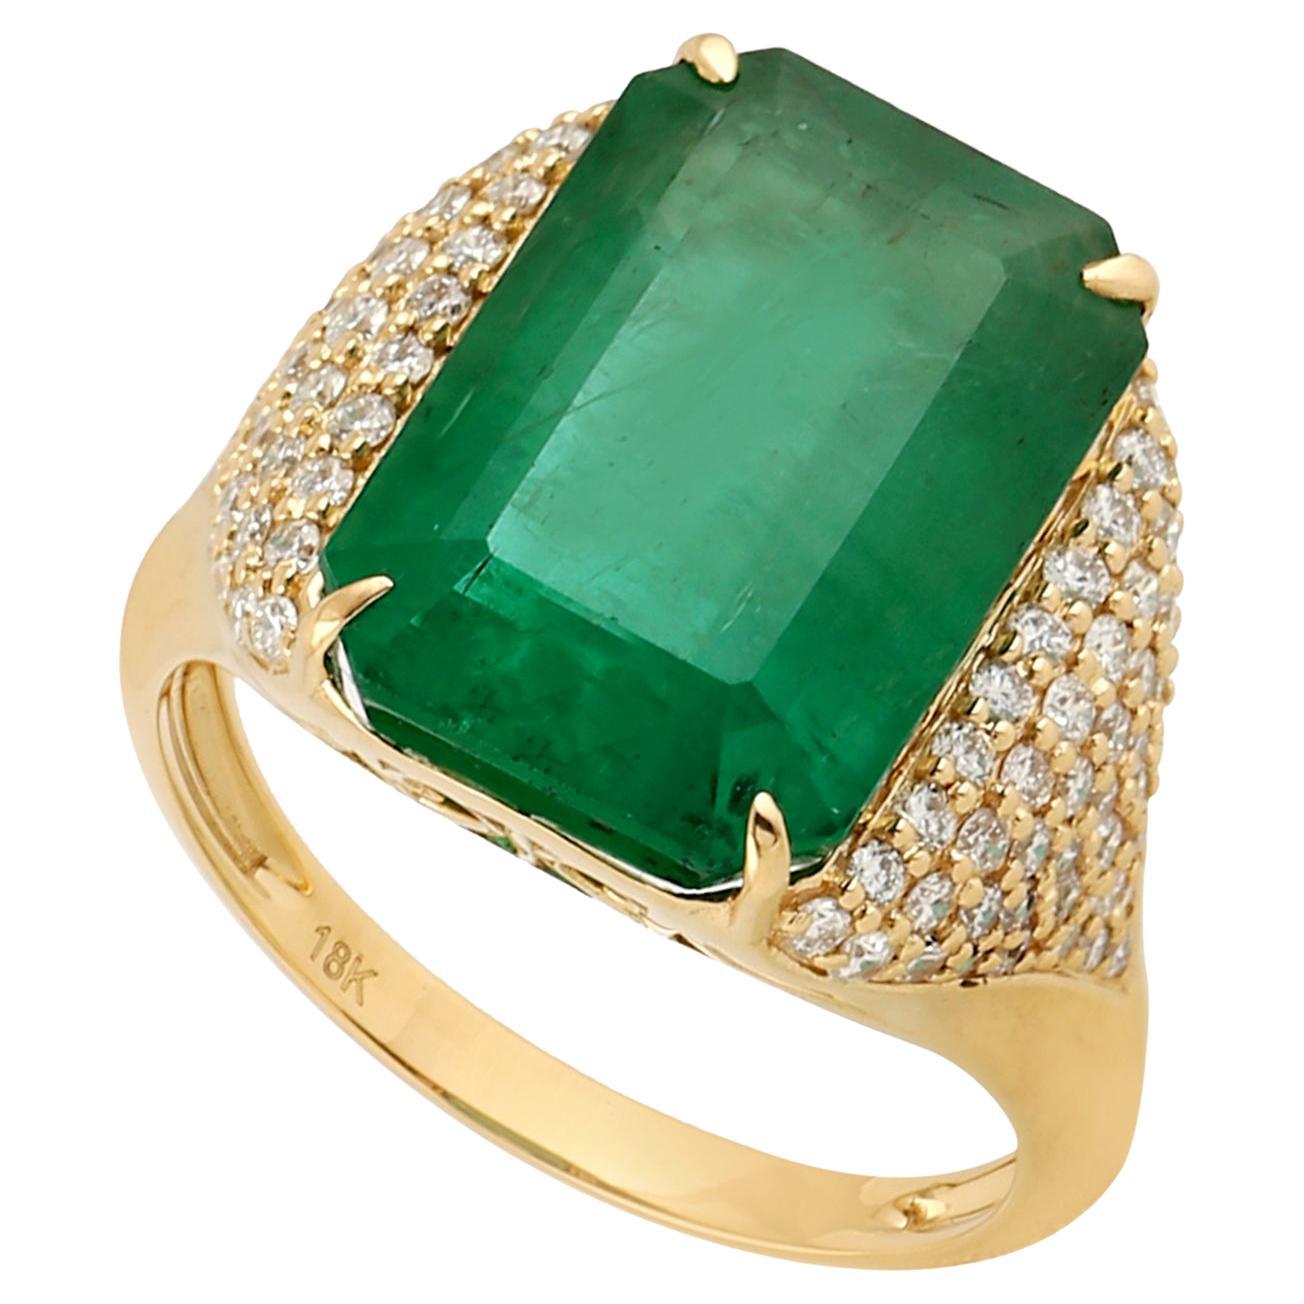 Octogen Zambian Emerald Ring with Side Pave Diamonds Made in 18k Yellow Gold